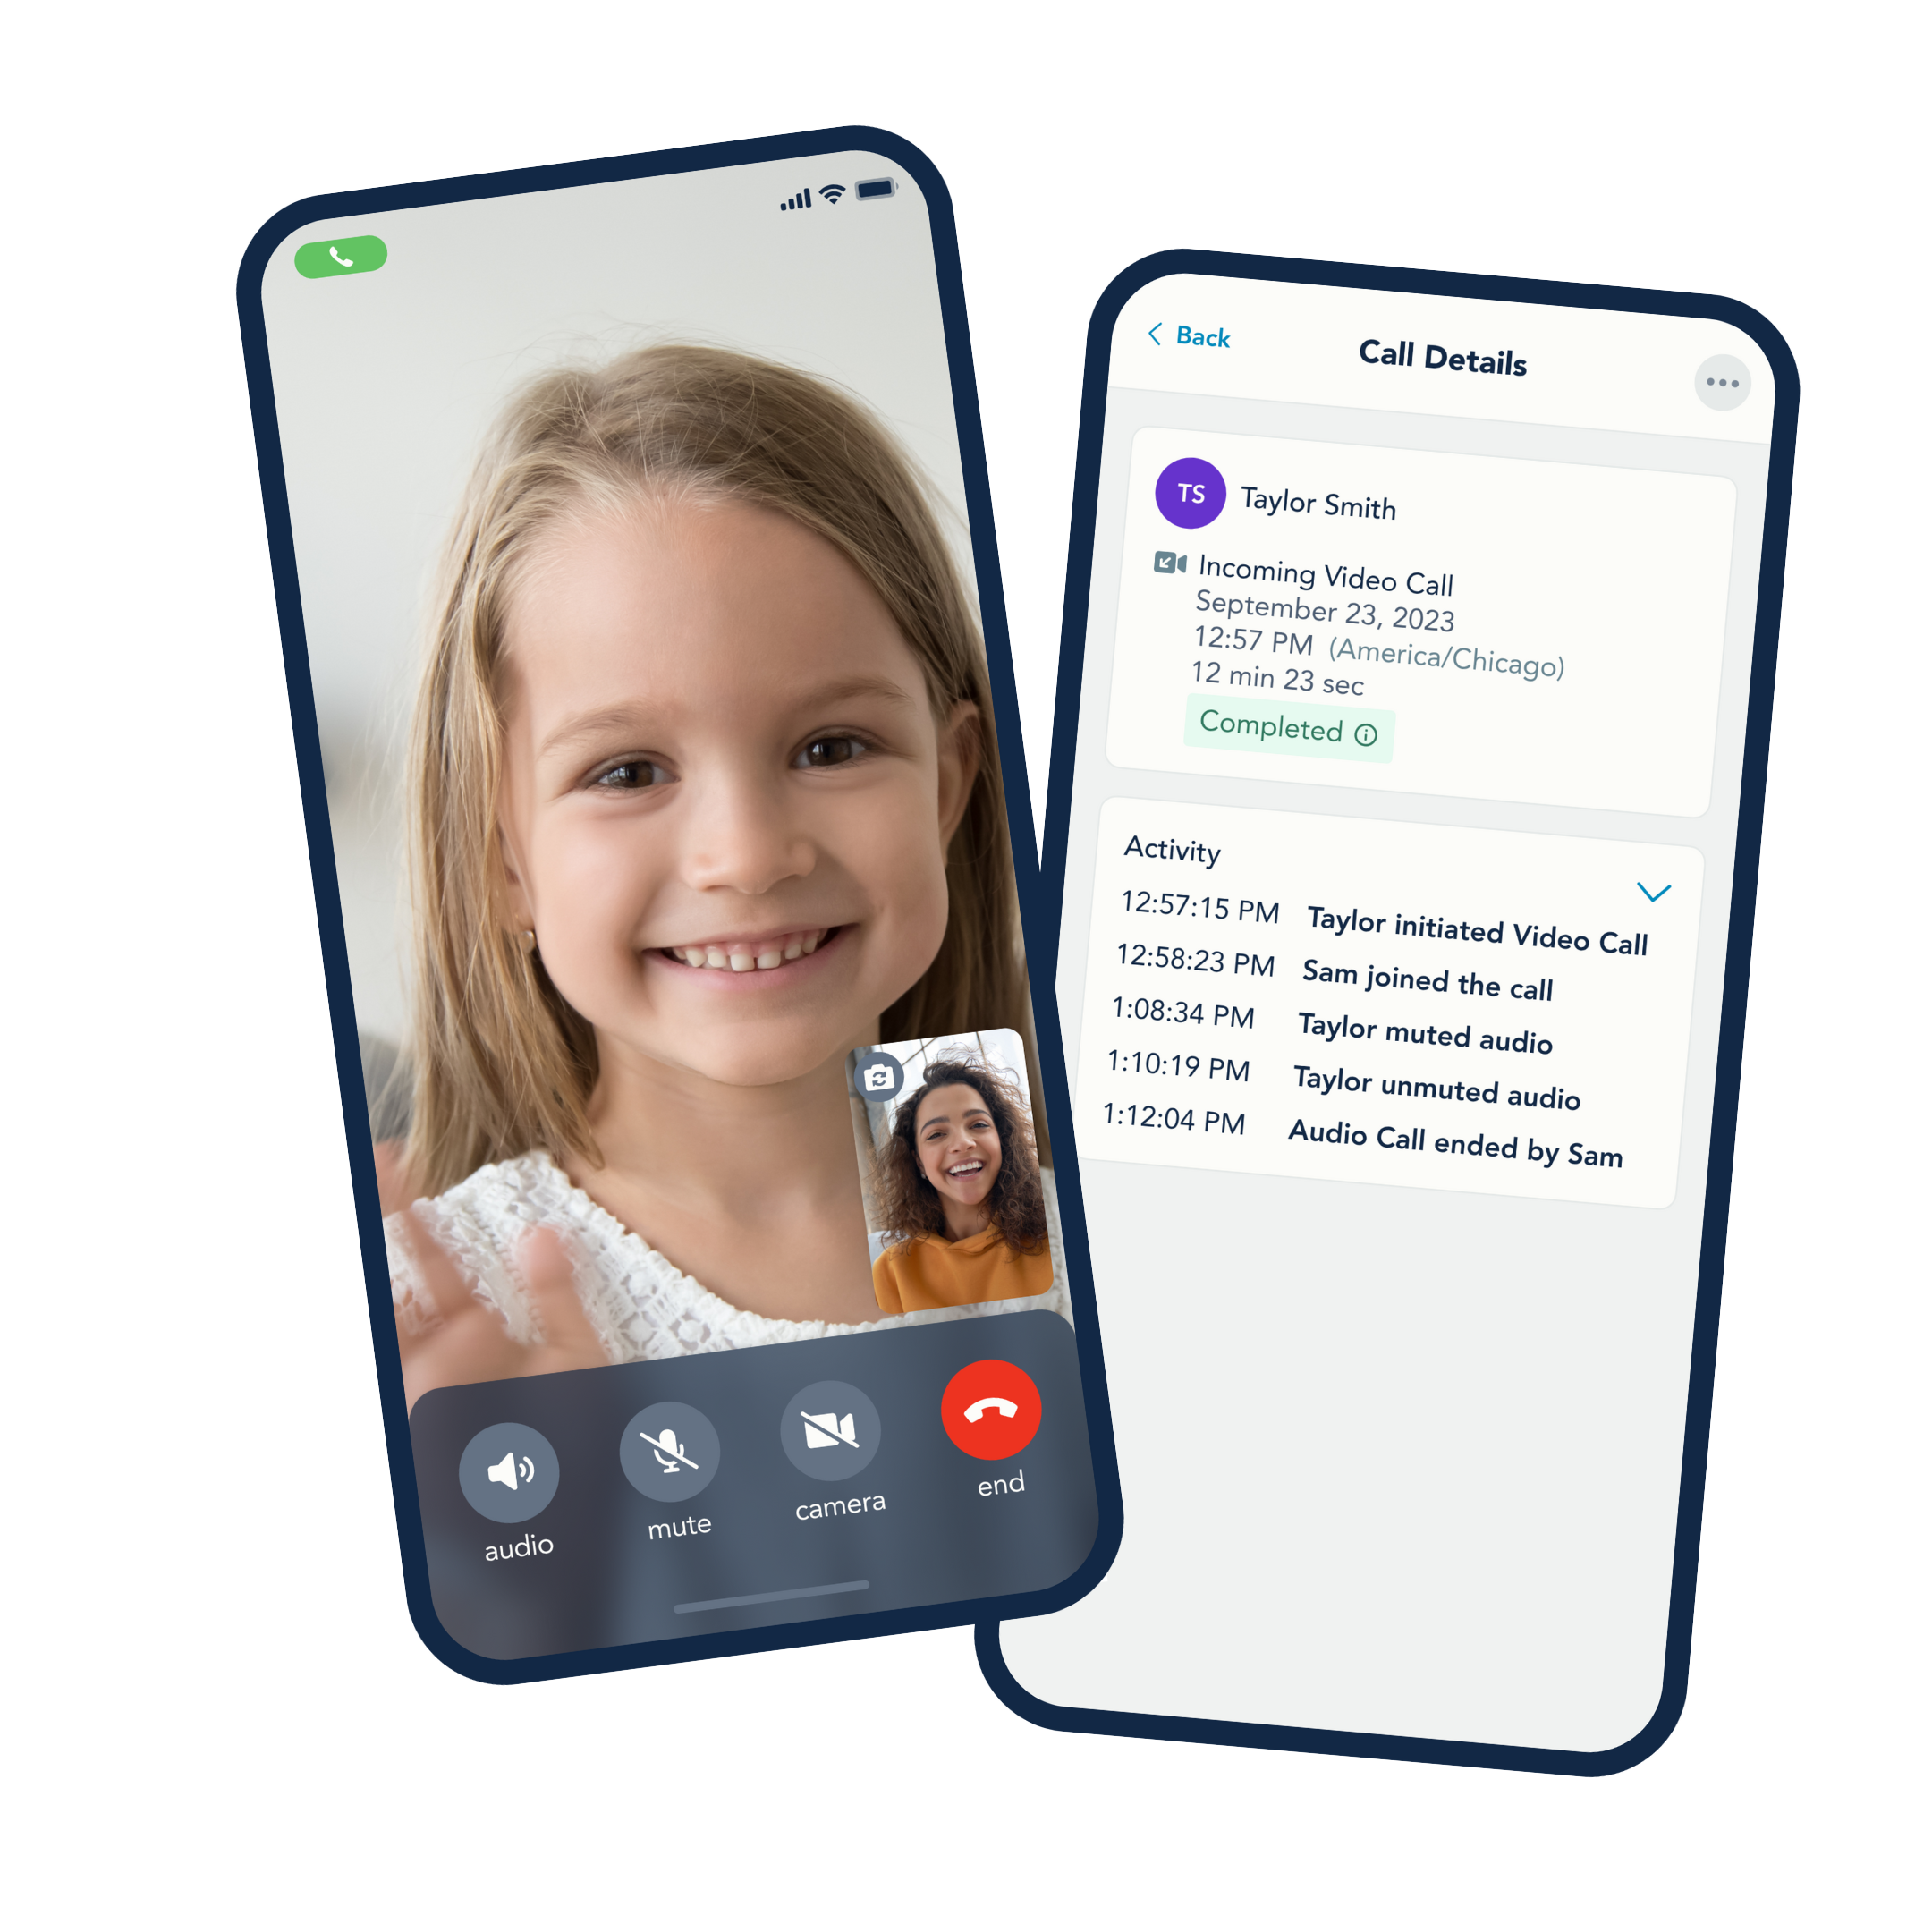 Example of a video call on OurFamilyWizard